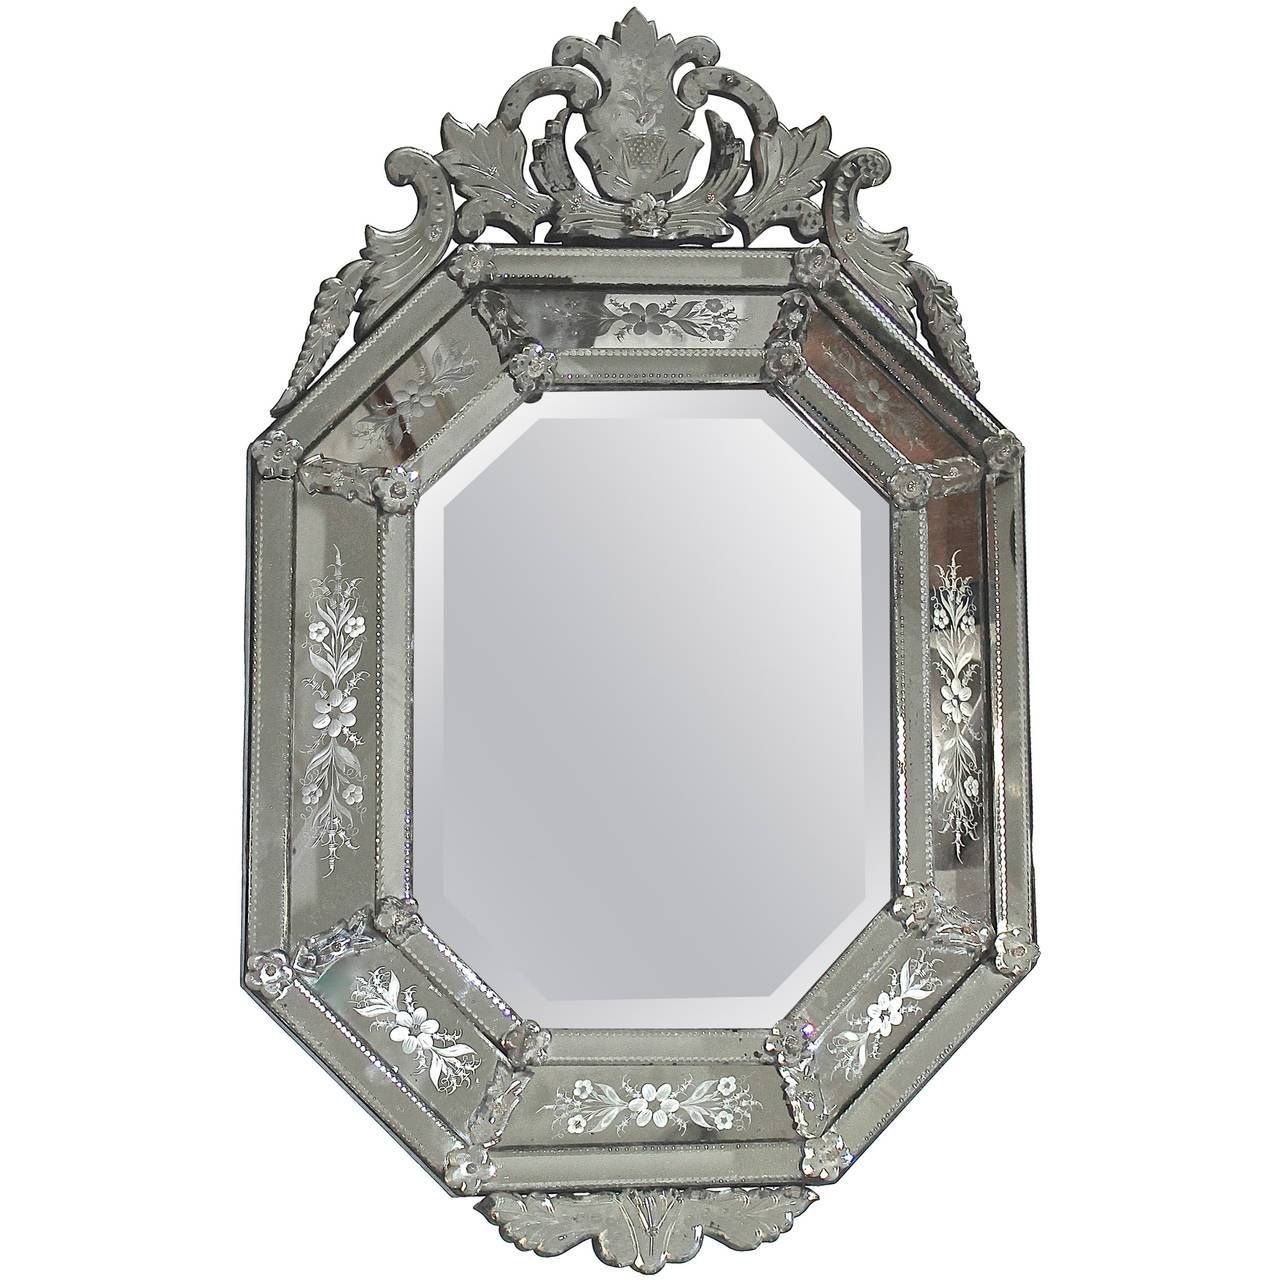 Mirror : Large Bevelled Dressing Table Triple Mirror Decorative Intended For Venetian Glass Mirrors (View 8 of 15)